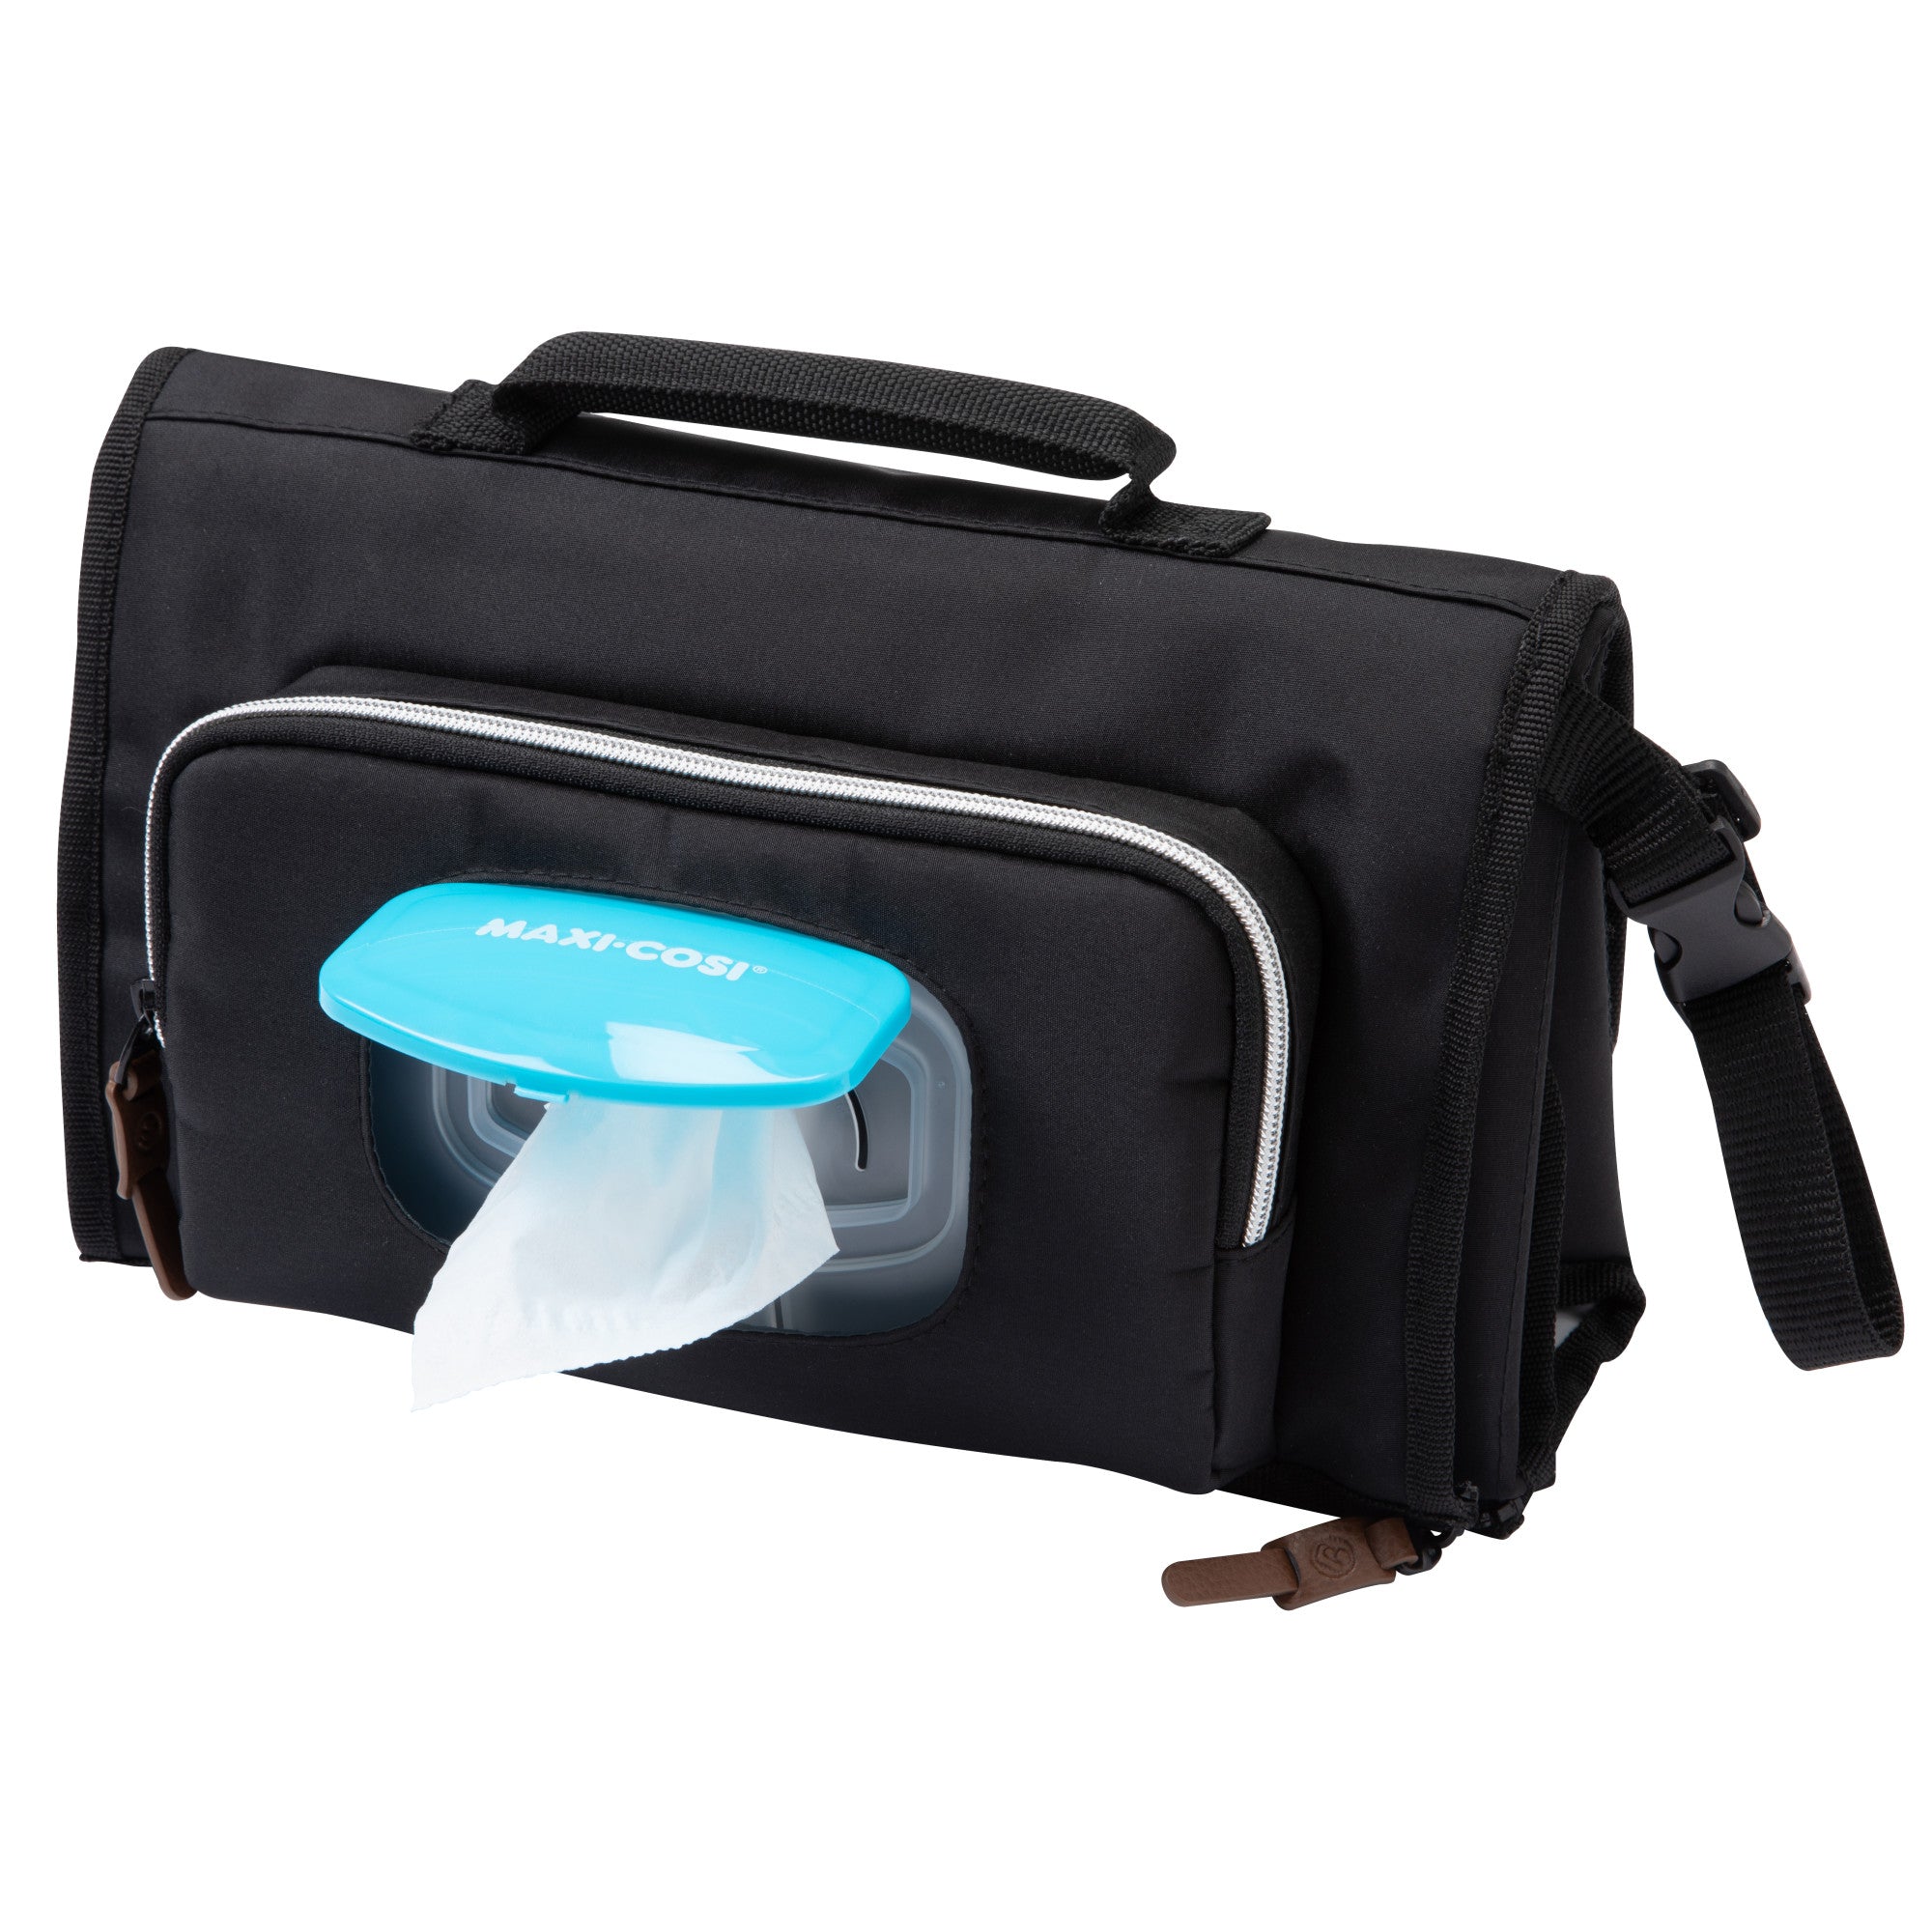 Black bag with zippered front pouch and clear opening for easy access to baby wipes